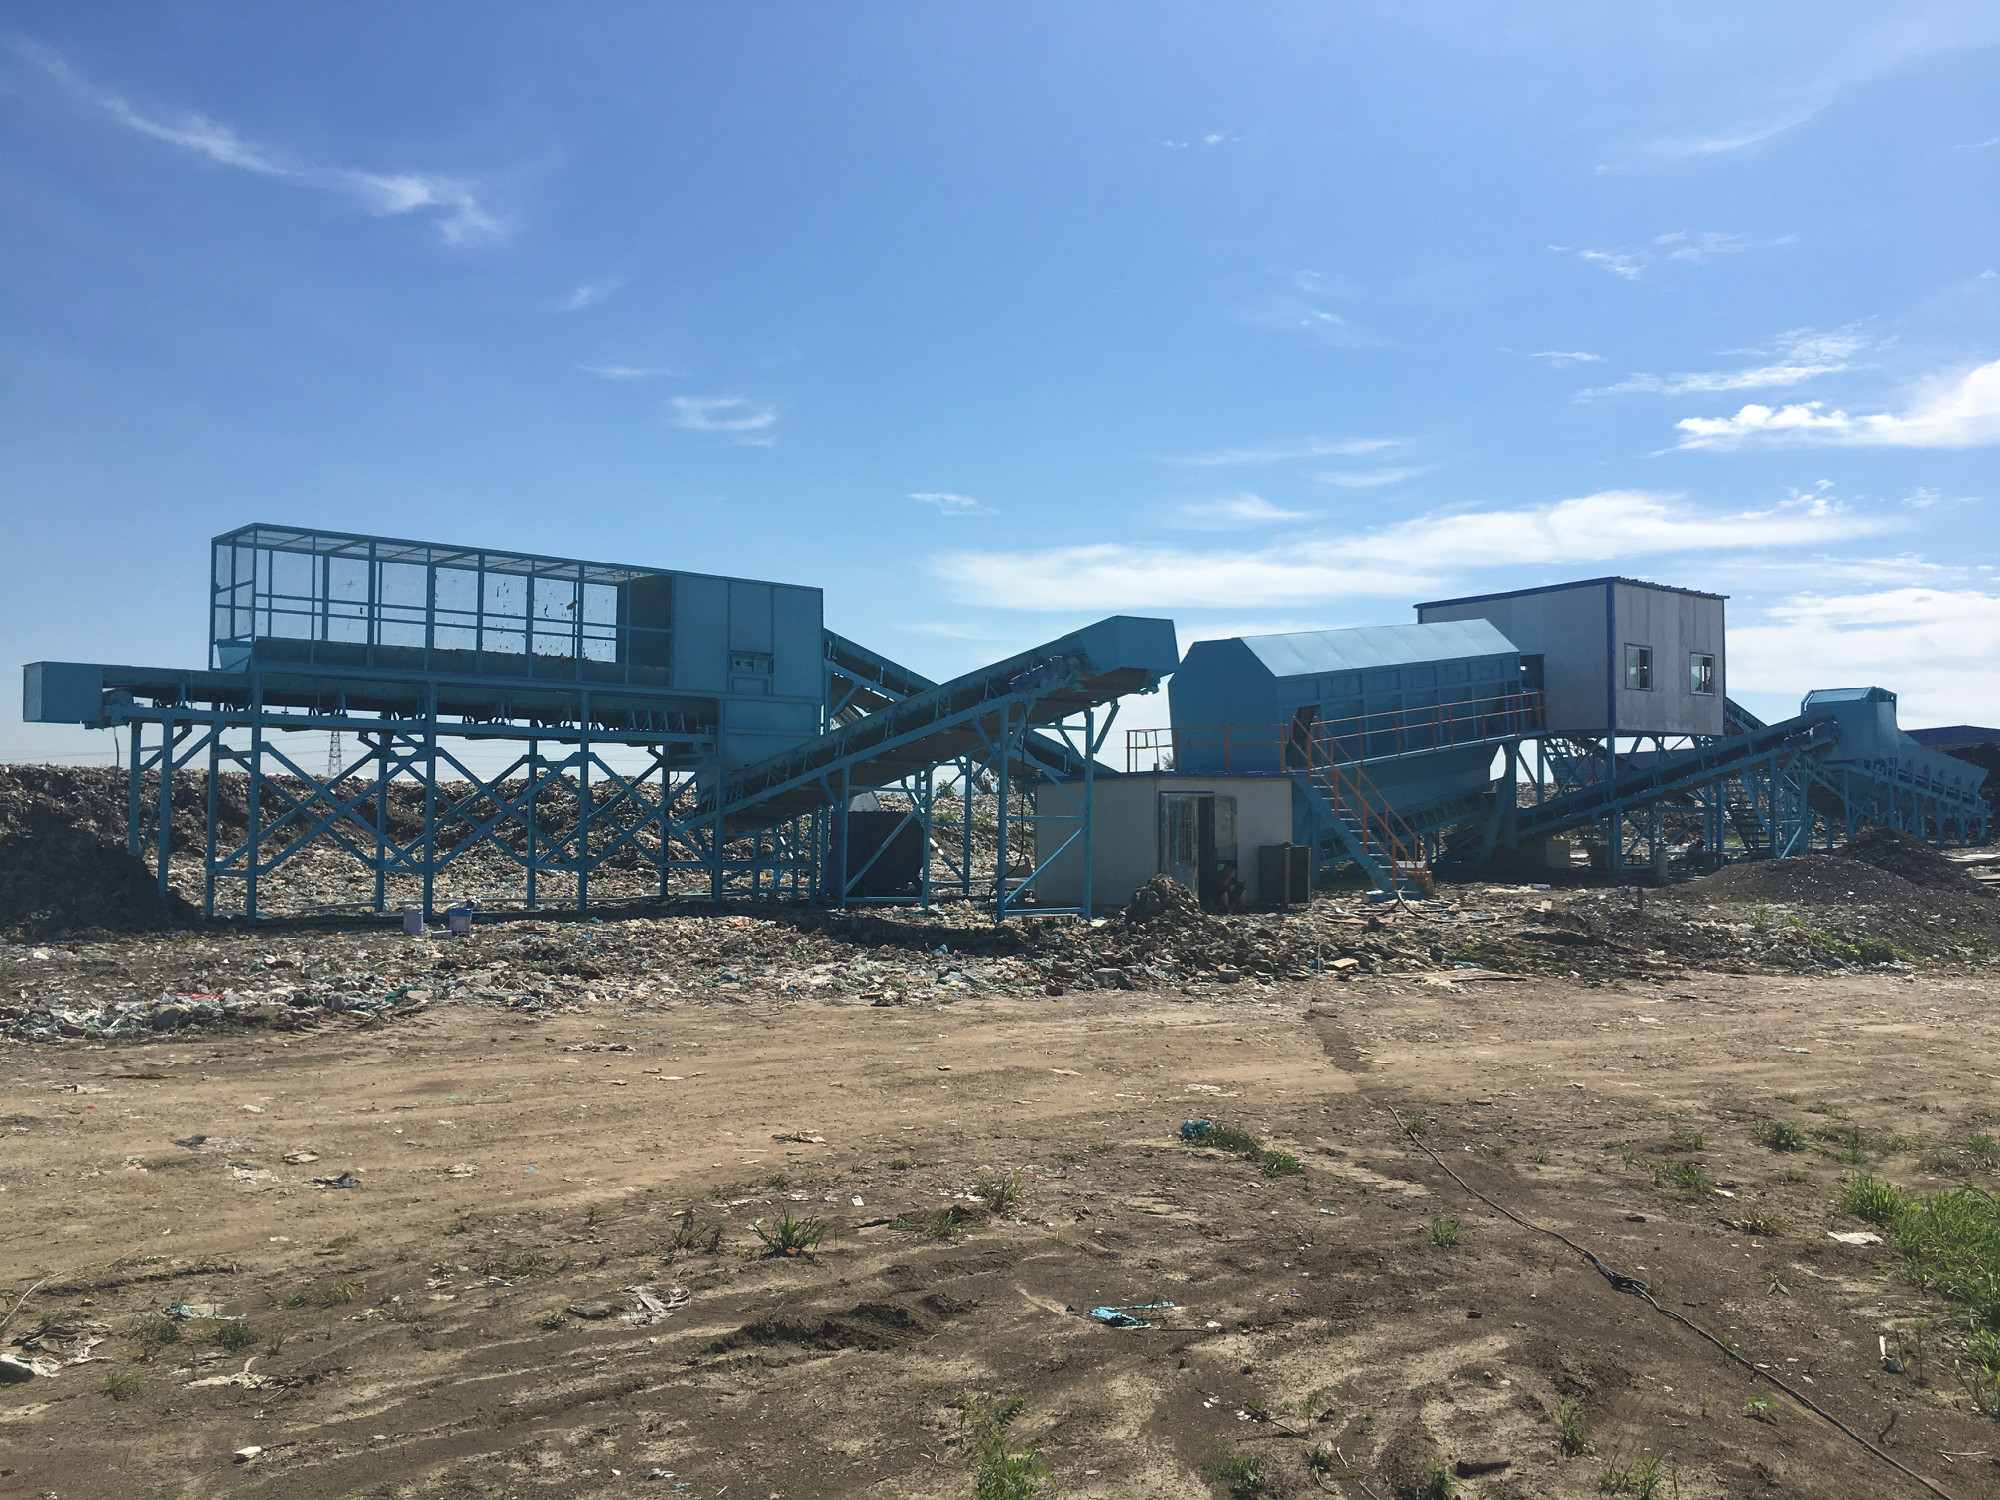 Siping mineralized waste in Jilin province